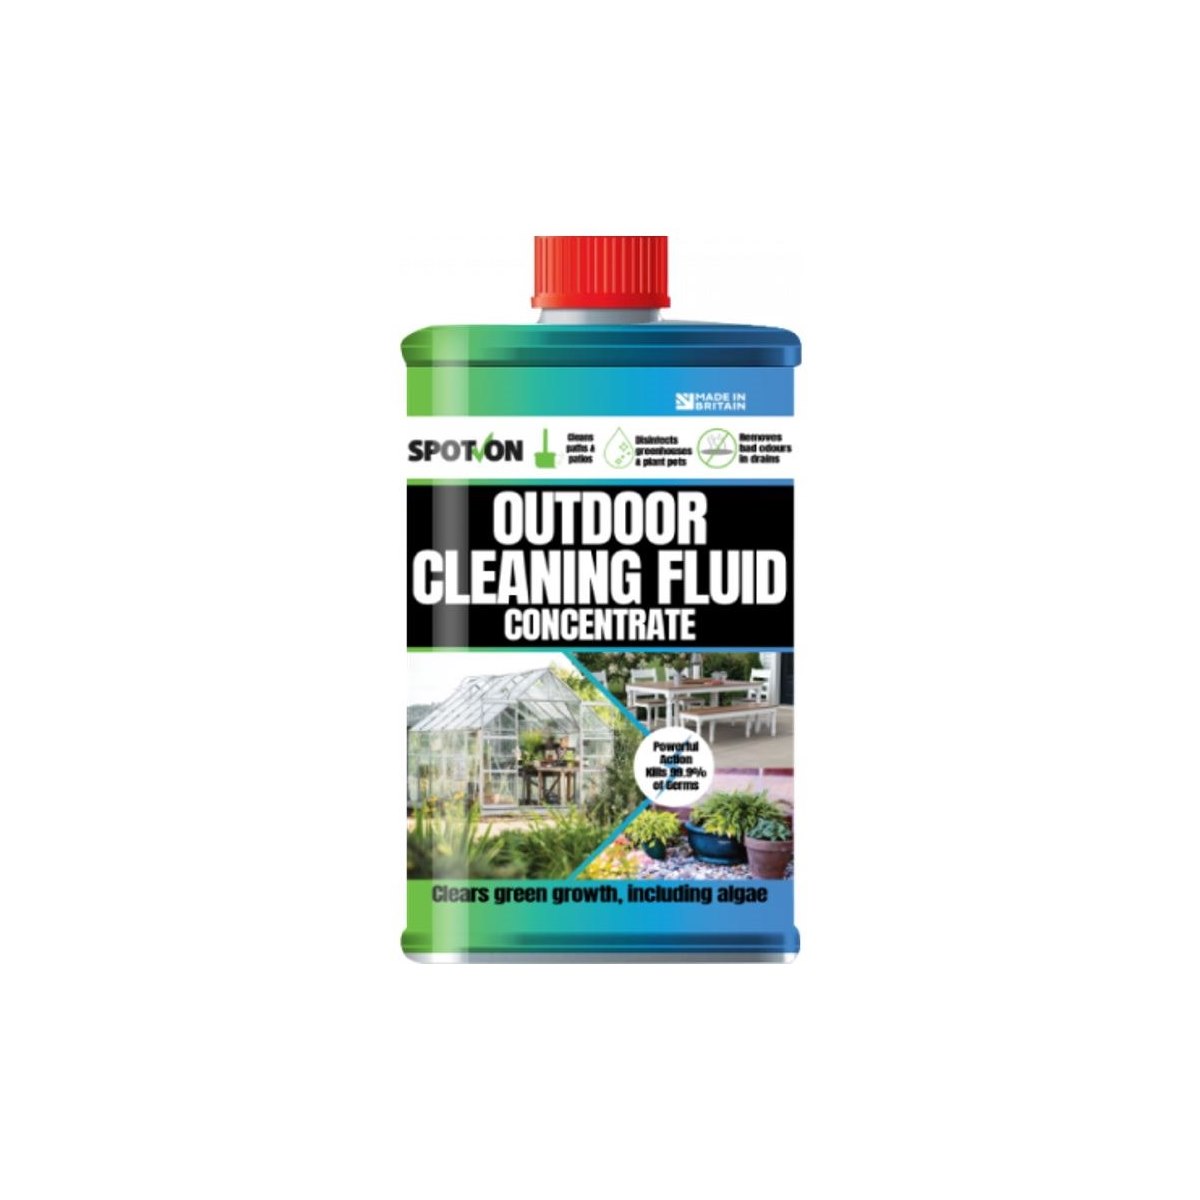 Spot On Outdoor Cleaning Fluid Concentrate 1L